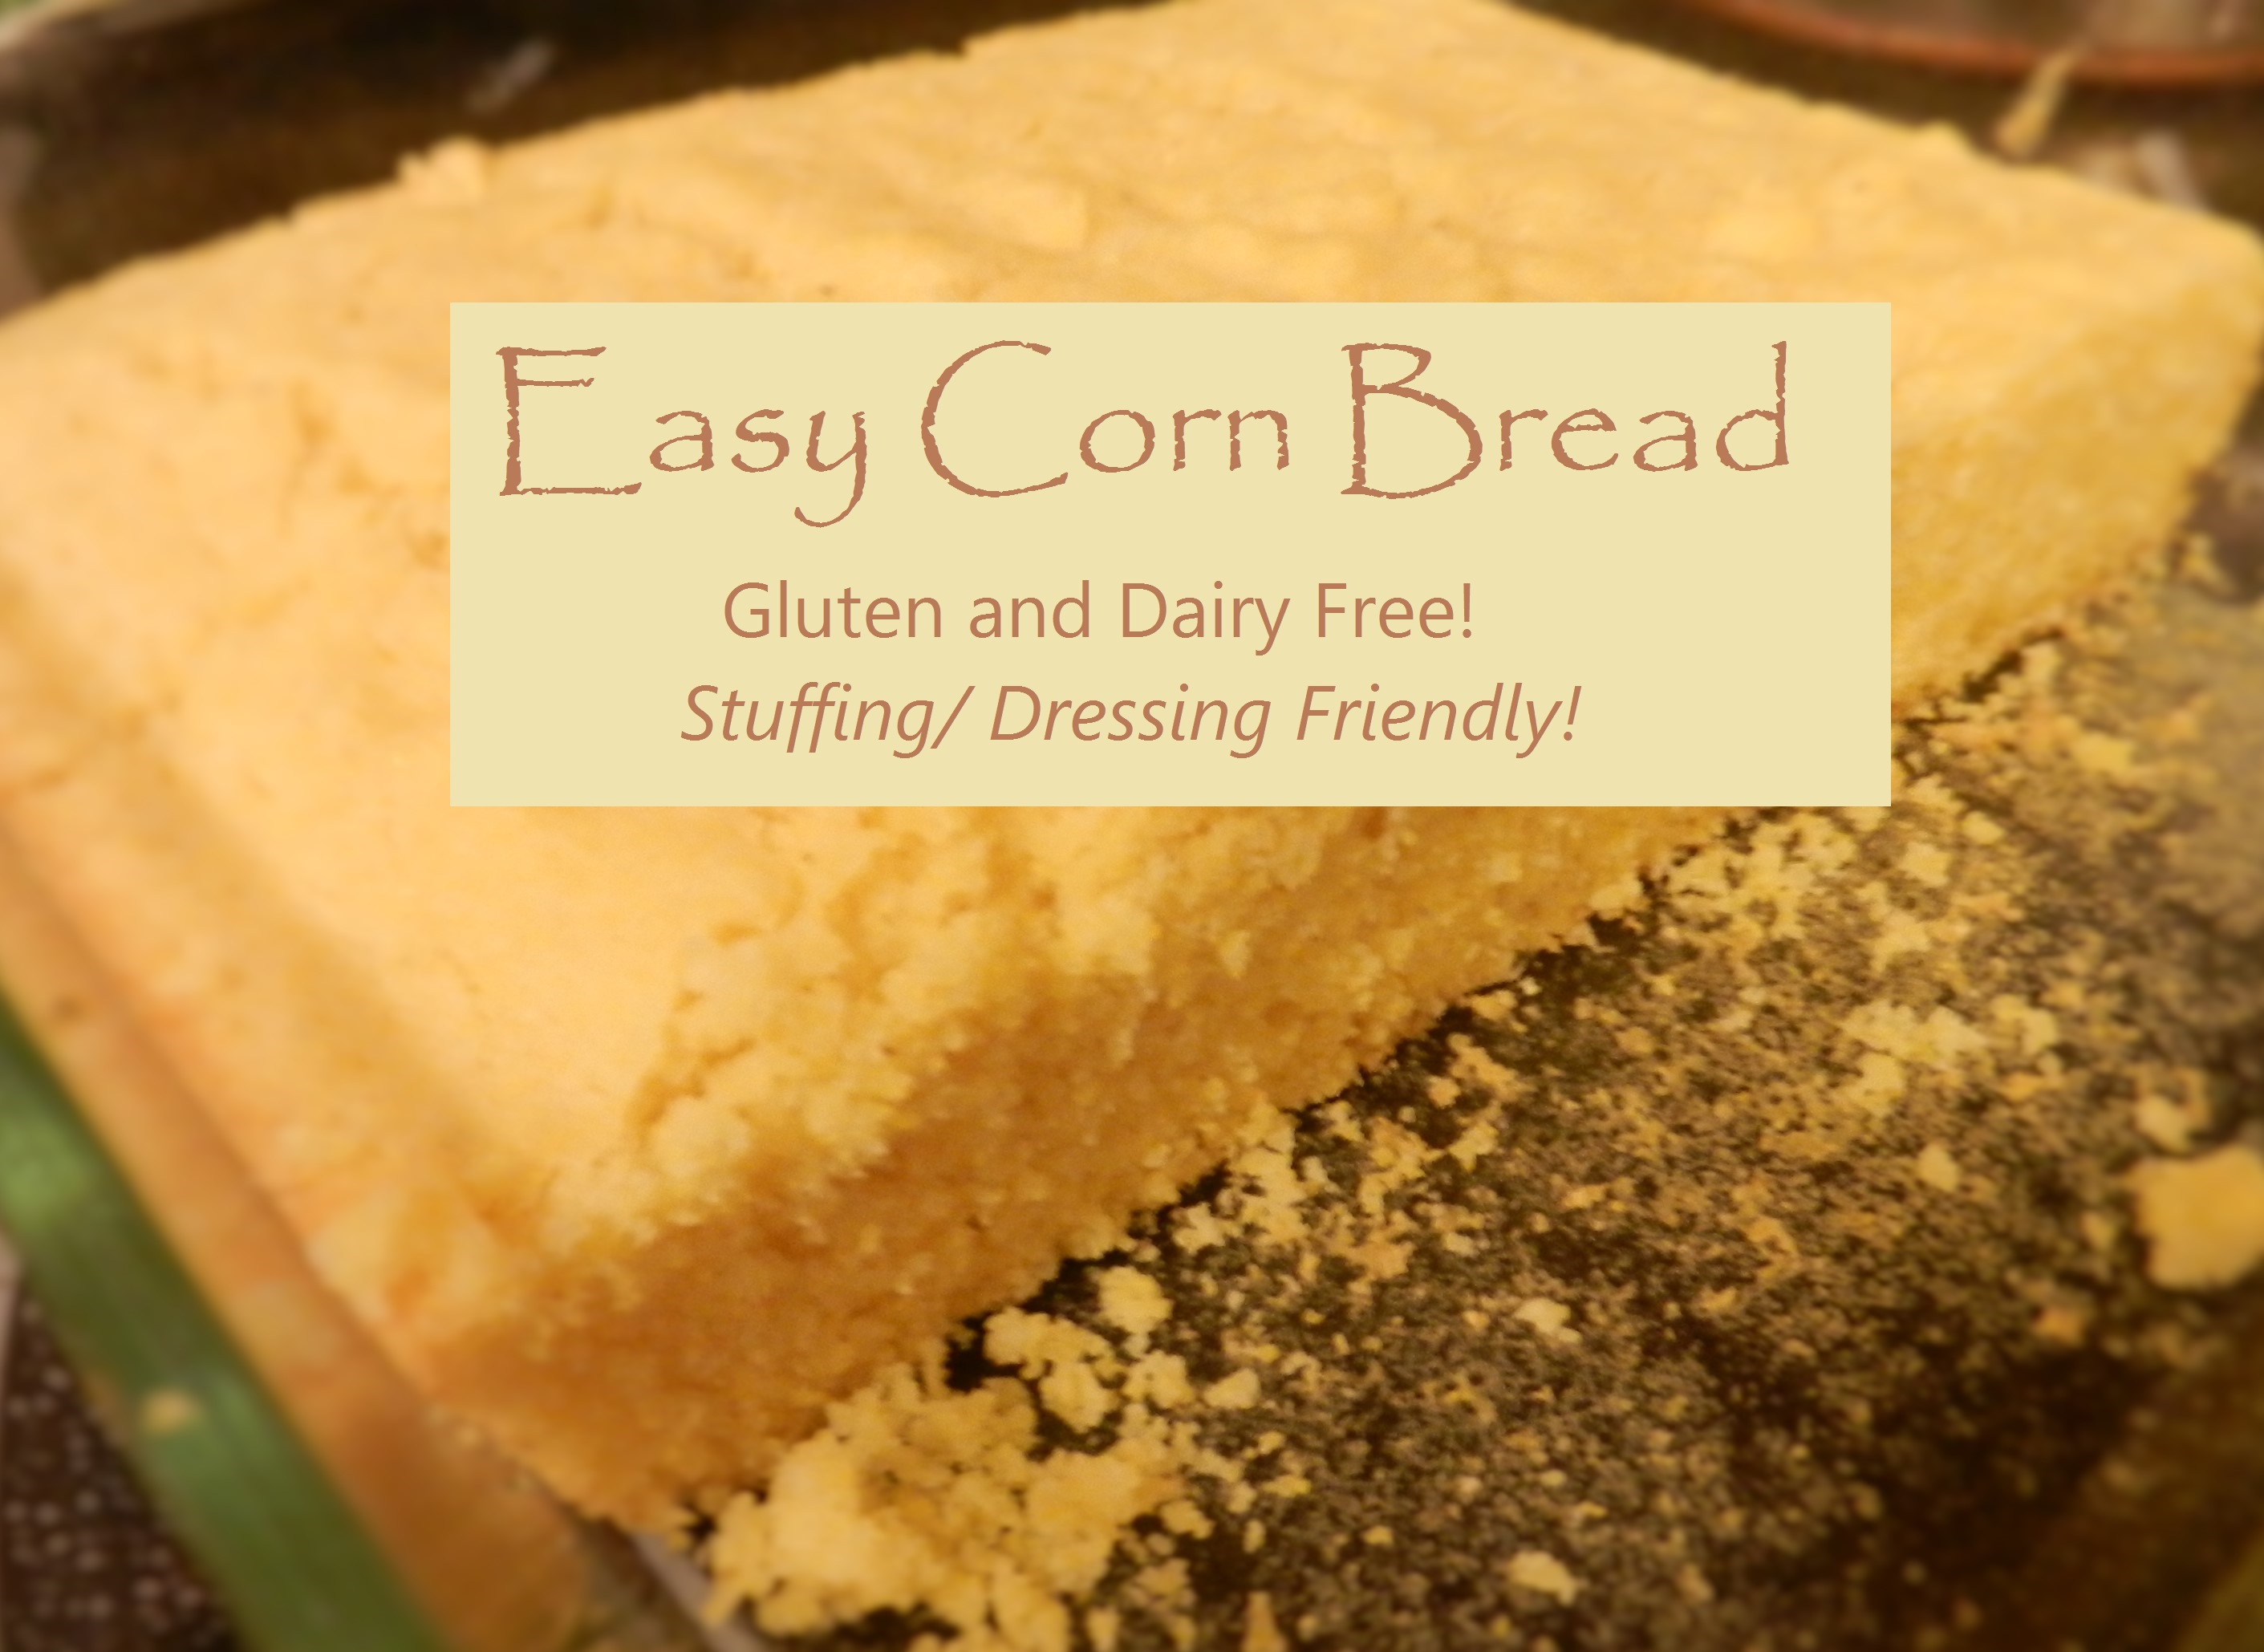 Easy Corn Bread – Gluten and Dairy Free (Stuffing/ Dressing Friendly!)